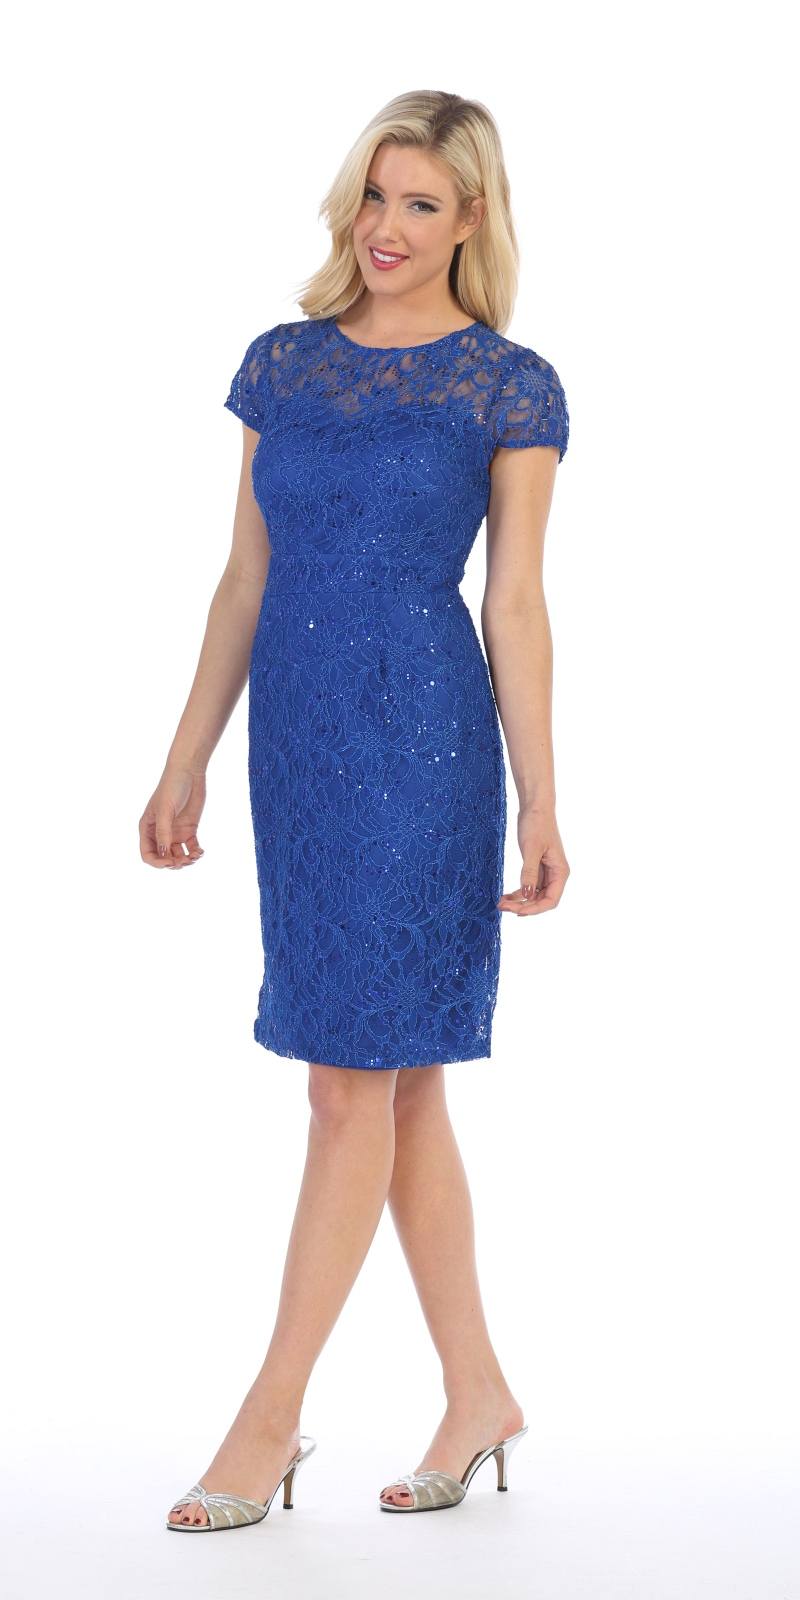 Lace Short Sleeves Knee-Length Cocktail Dress with Sequins Royal Blue ...